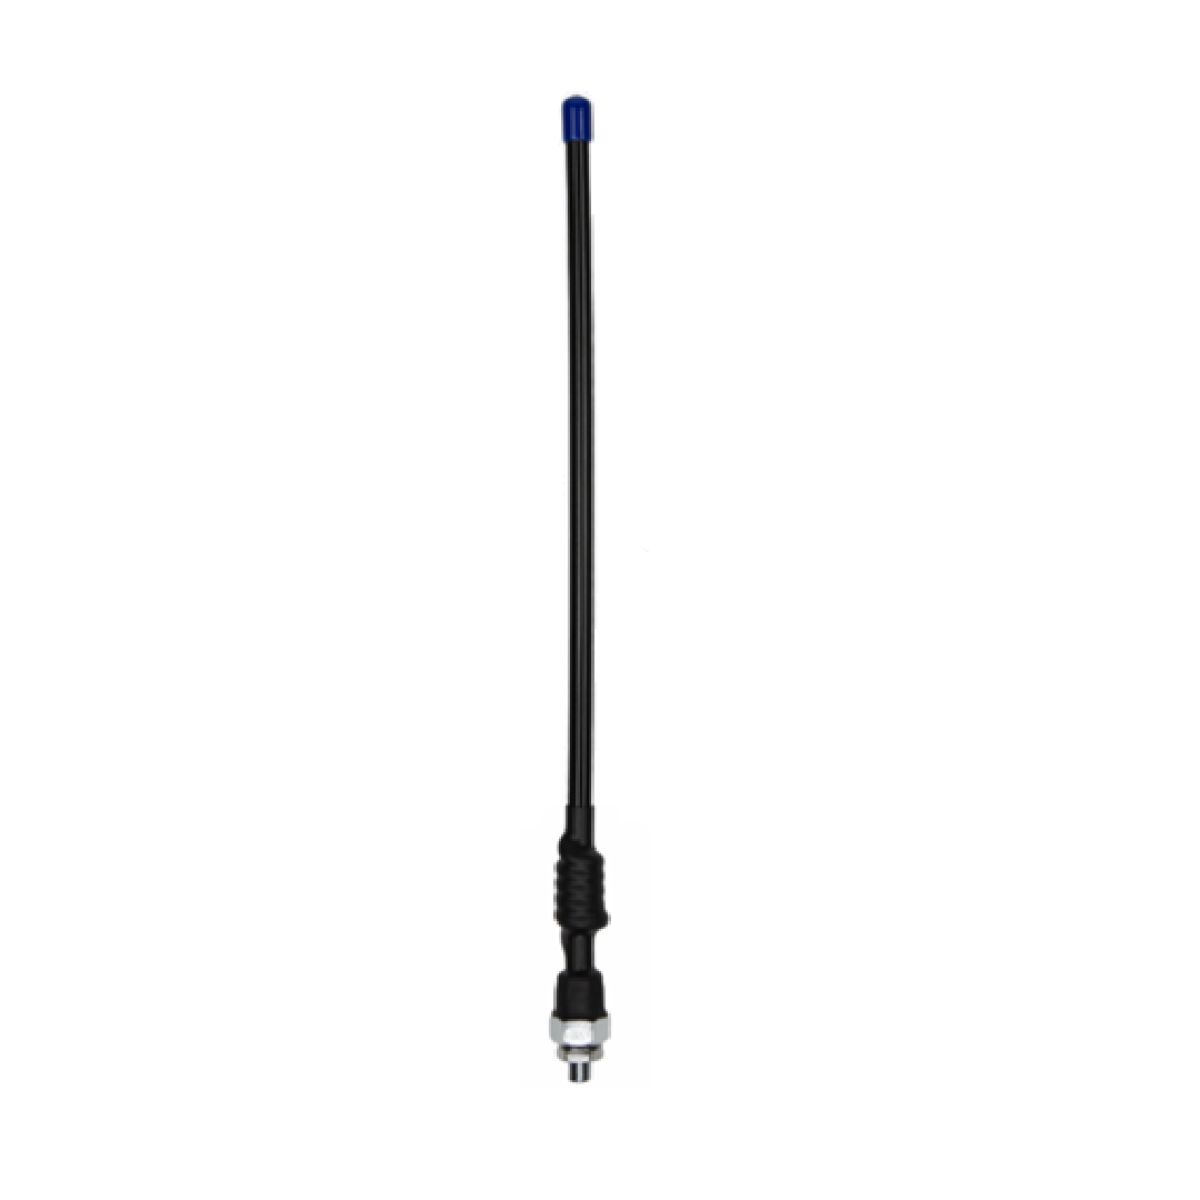 GME AE4005 UHF 380mm Flexible Ground Independent Antenna with Lead (2.1dBi Gain)